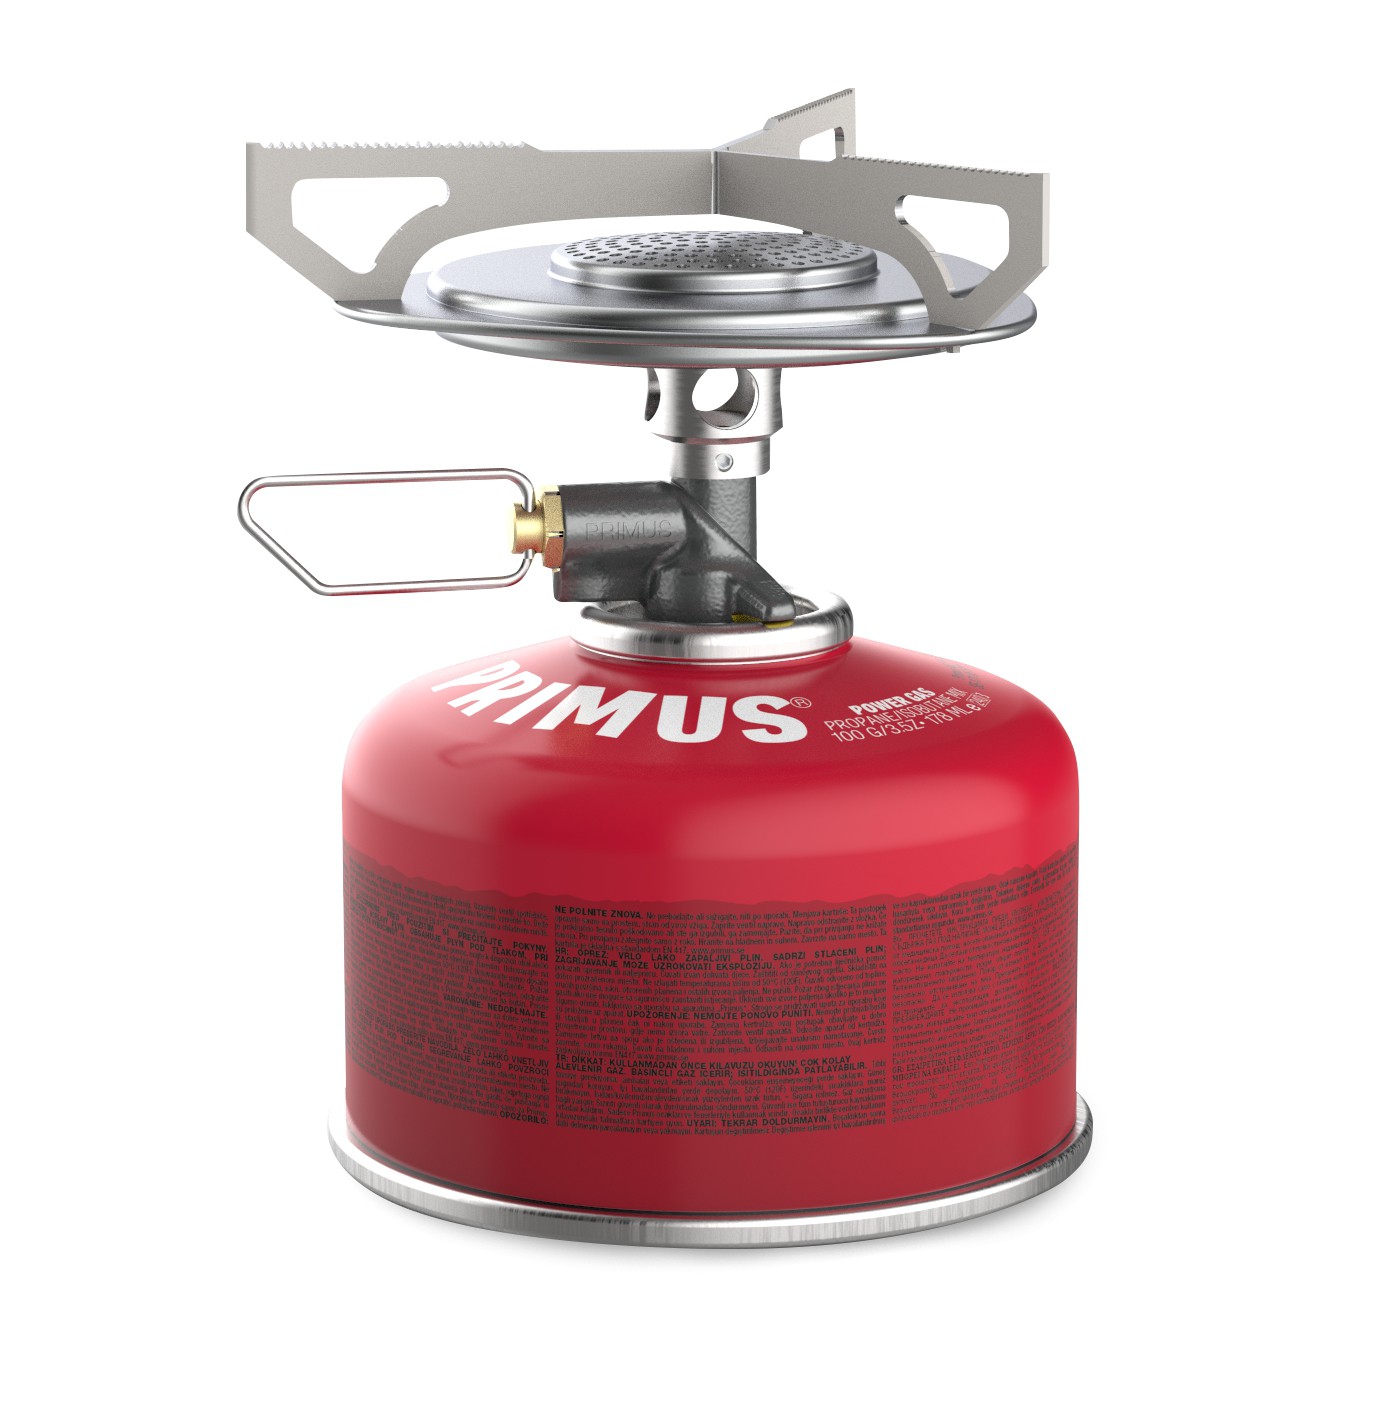 Primus Essential Trail Stove: surdy everyday stove